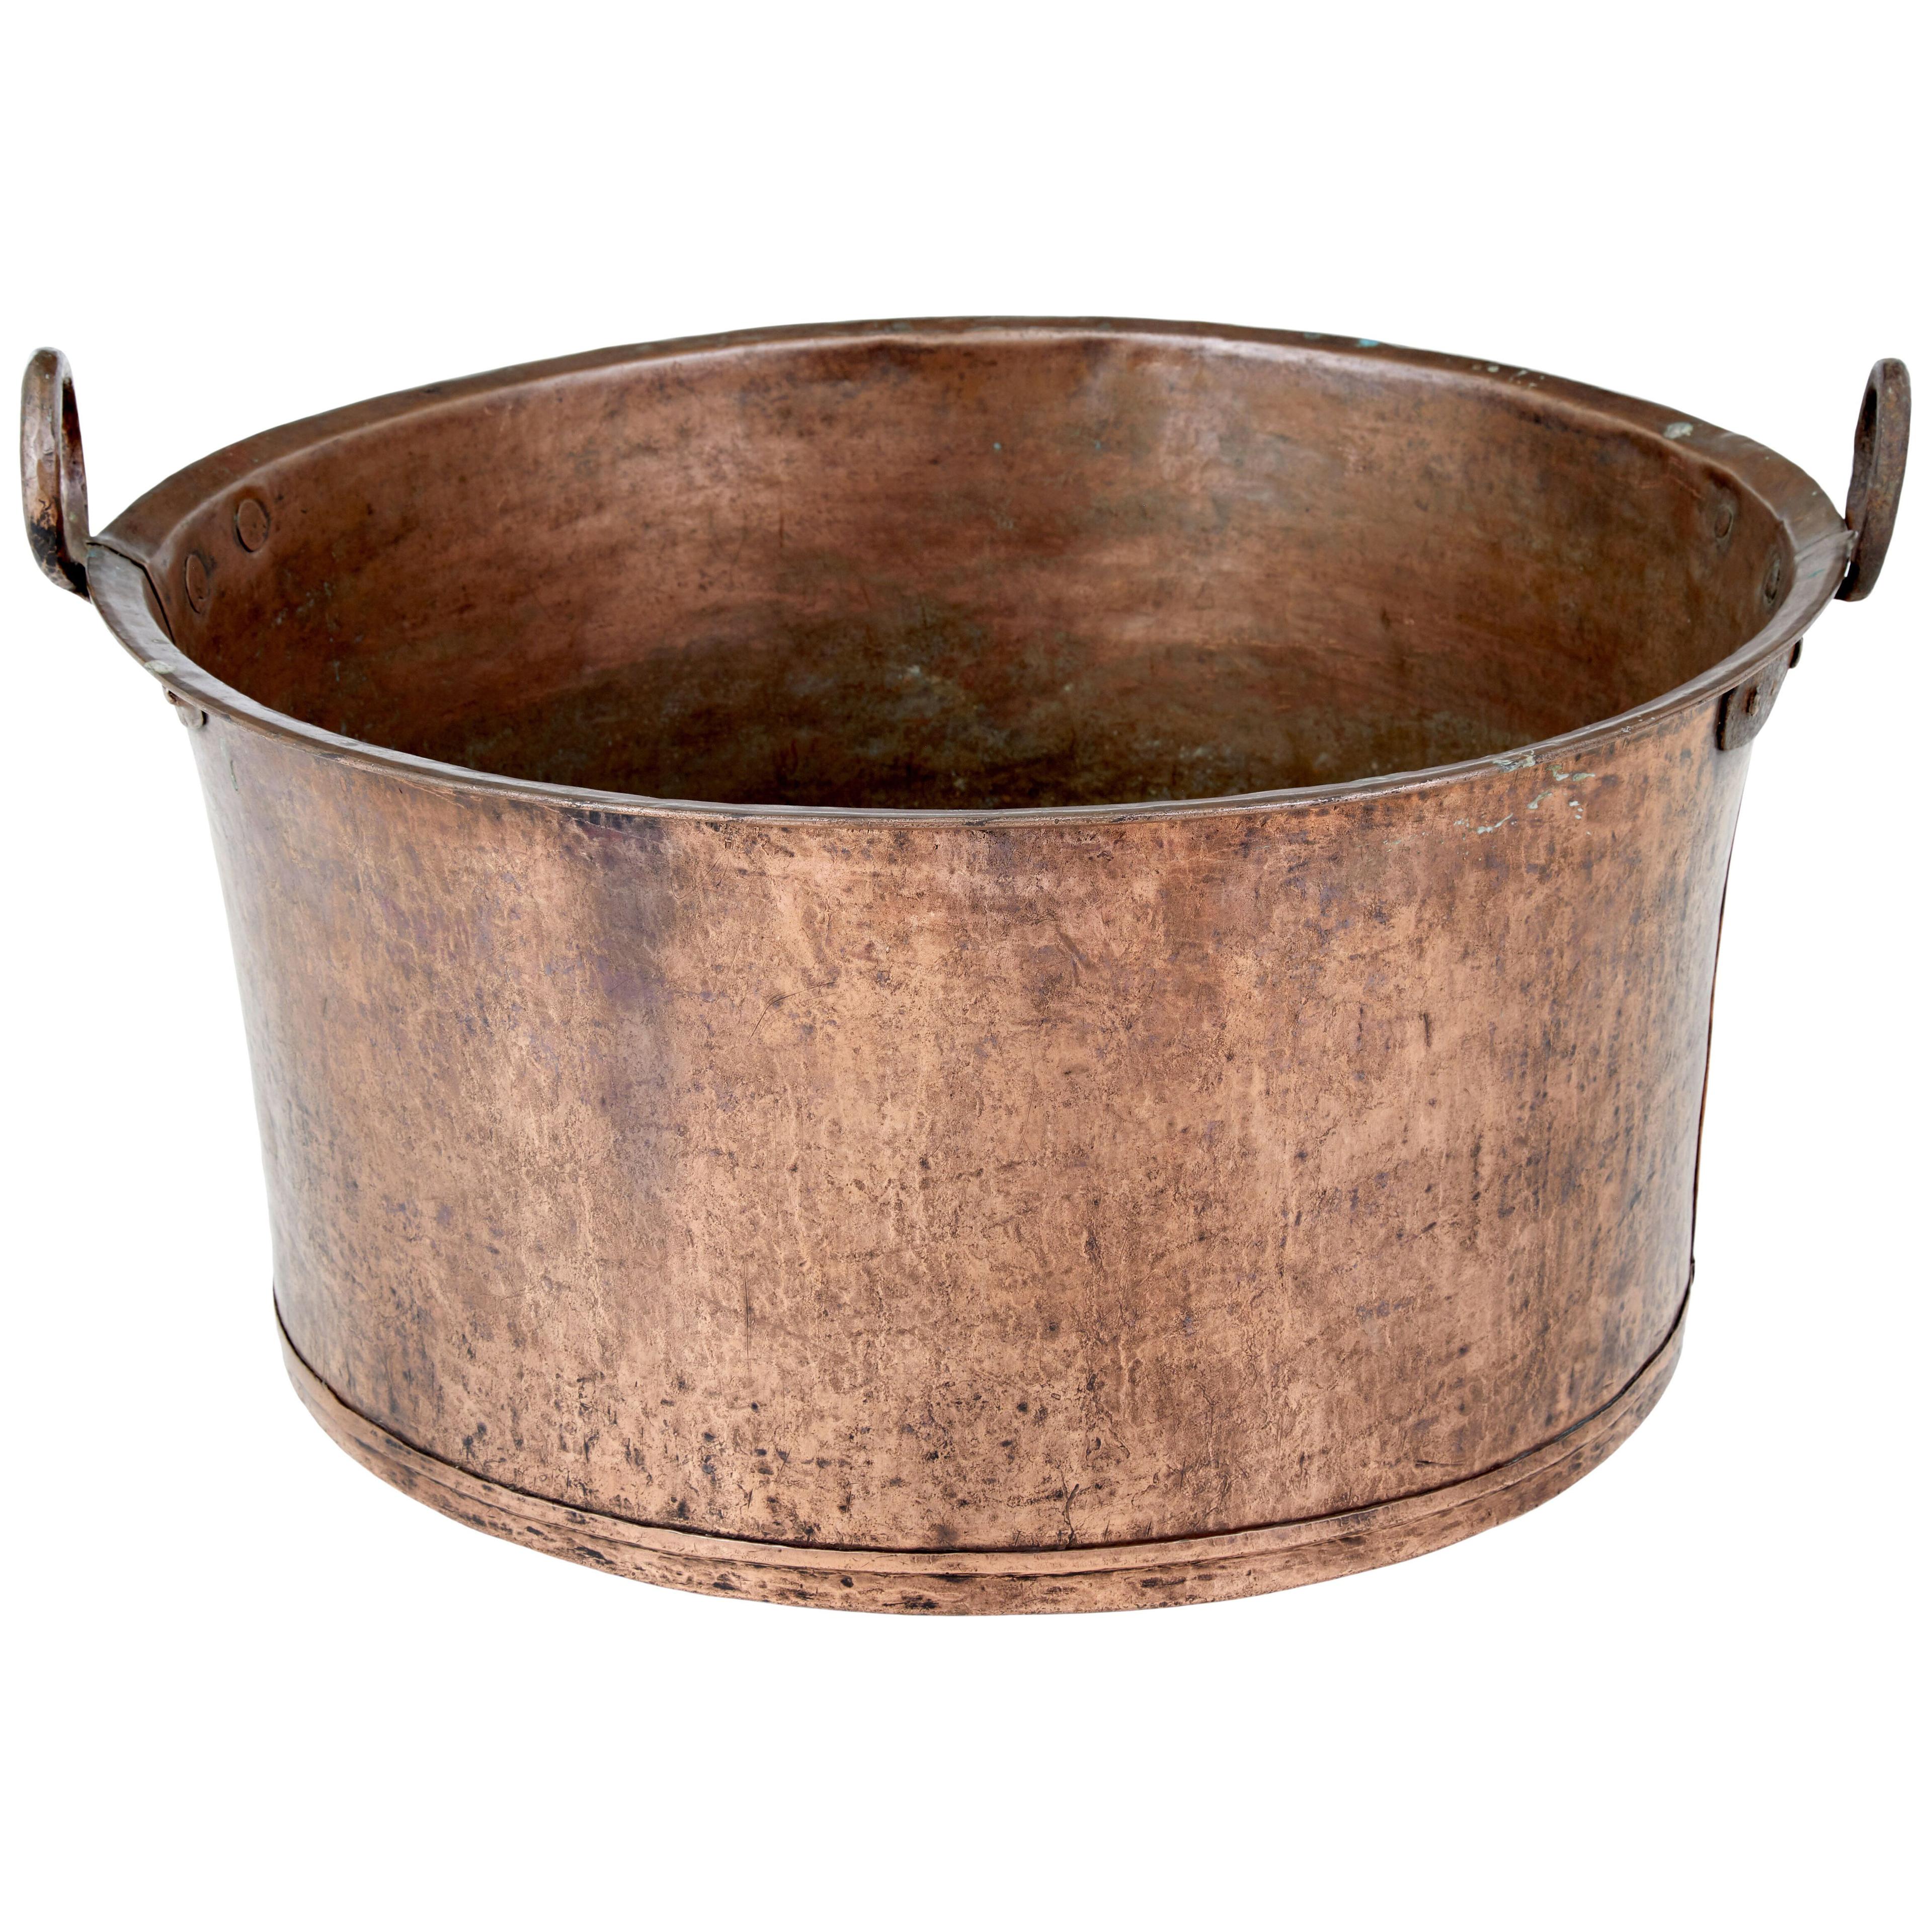 19TH CENTURY COPPER COOKING POT